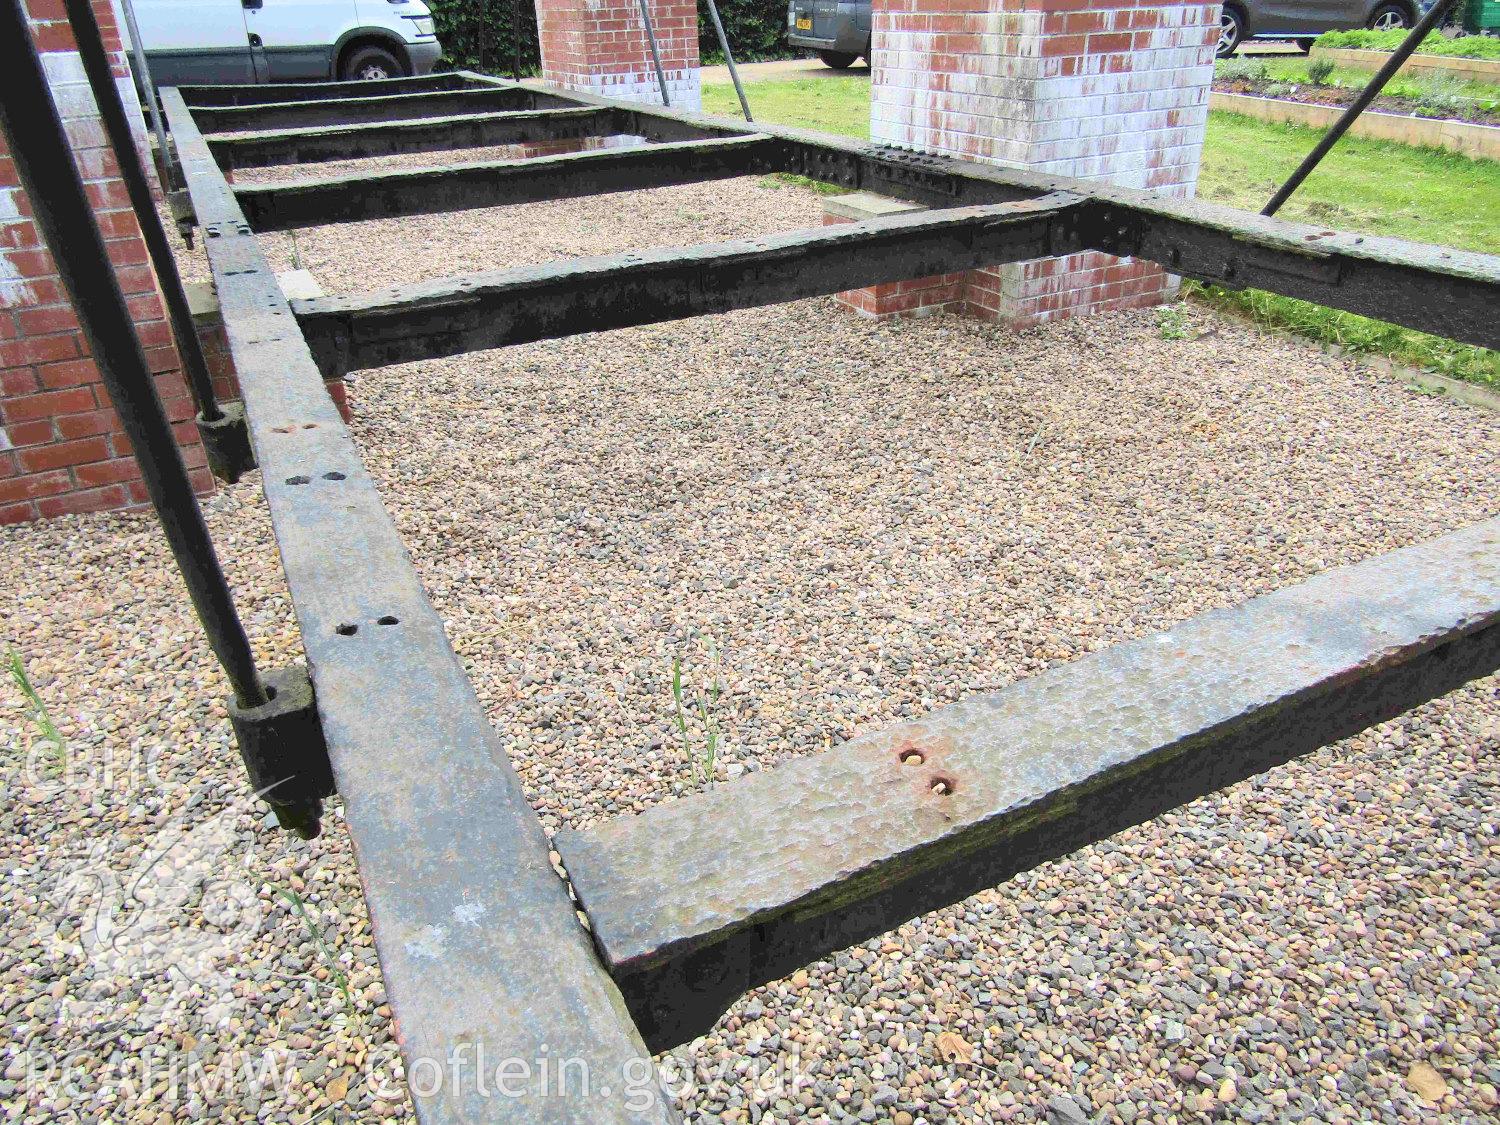 Colour digital photograph showing detailed view of the base of the boat weighing machine that was used on the Glamorganshire Canal. Photographed by Kelvin Merriott at the National Waterfront Museum, Swansea, in 2018.